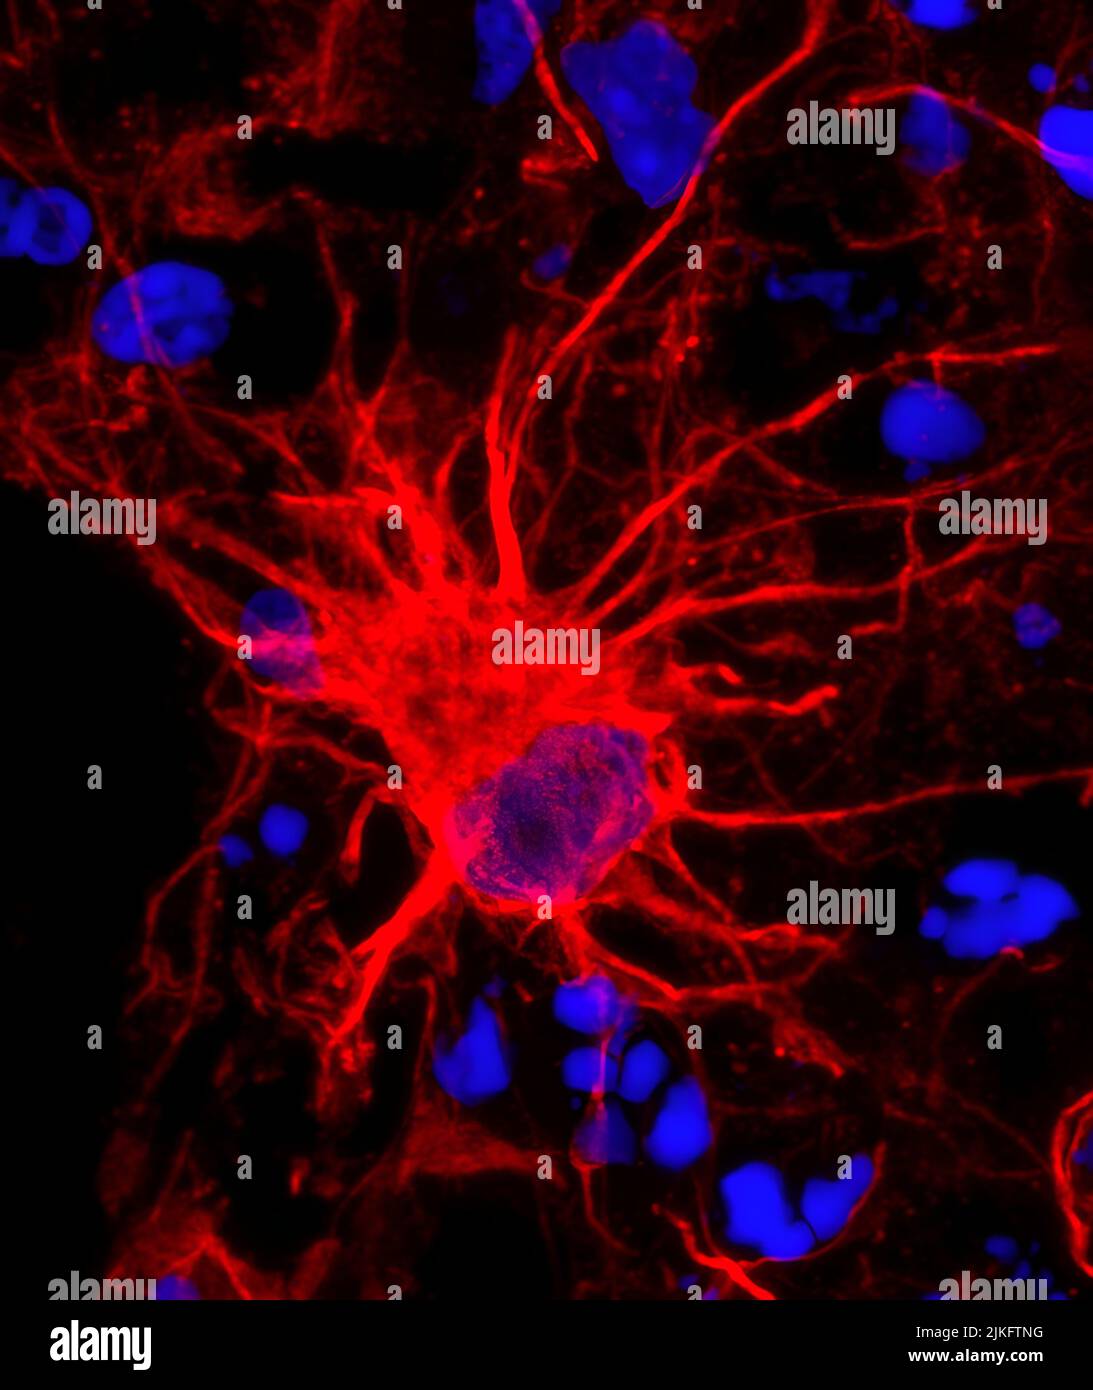 Researchers study star-shaped brain cells: NIH-funded researchers have used 3D collections of brain tissue from human cells to study star-shaped astrocytes in the brain. Stock Photo